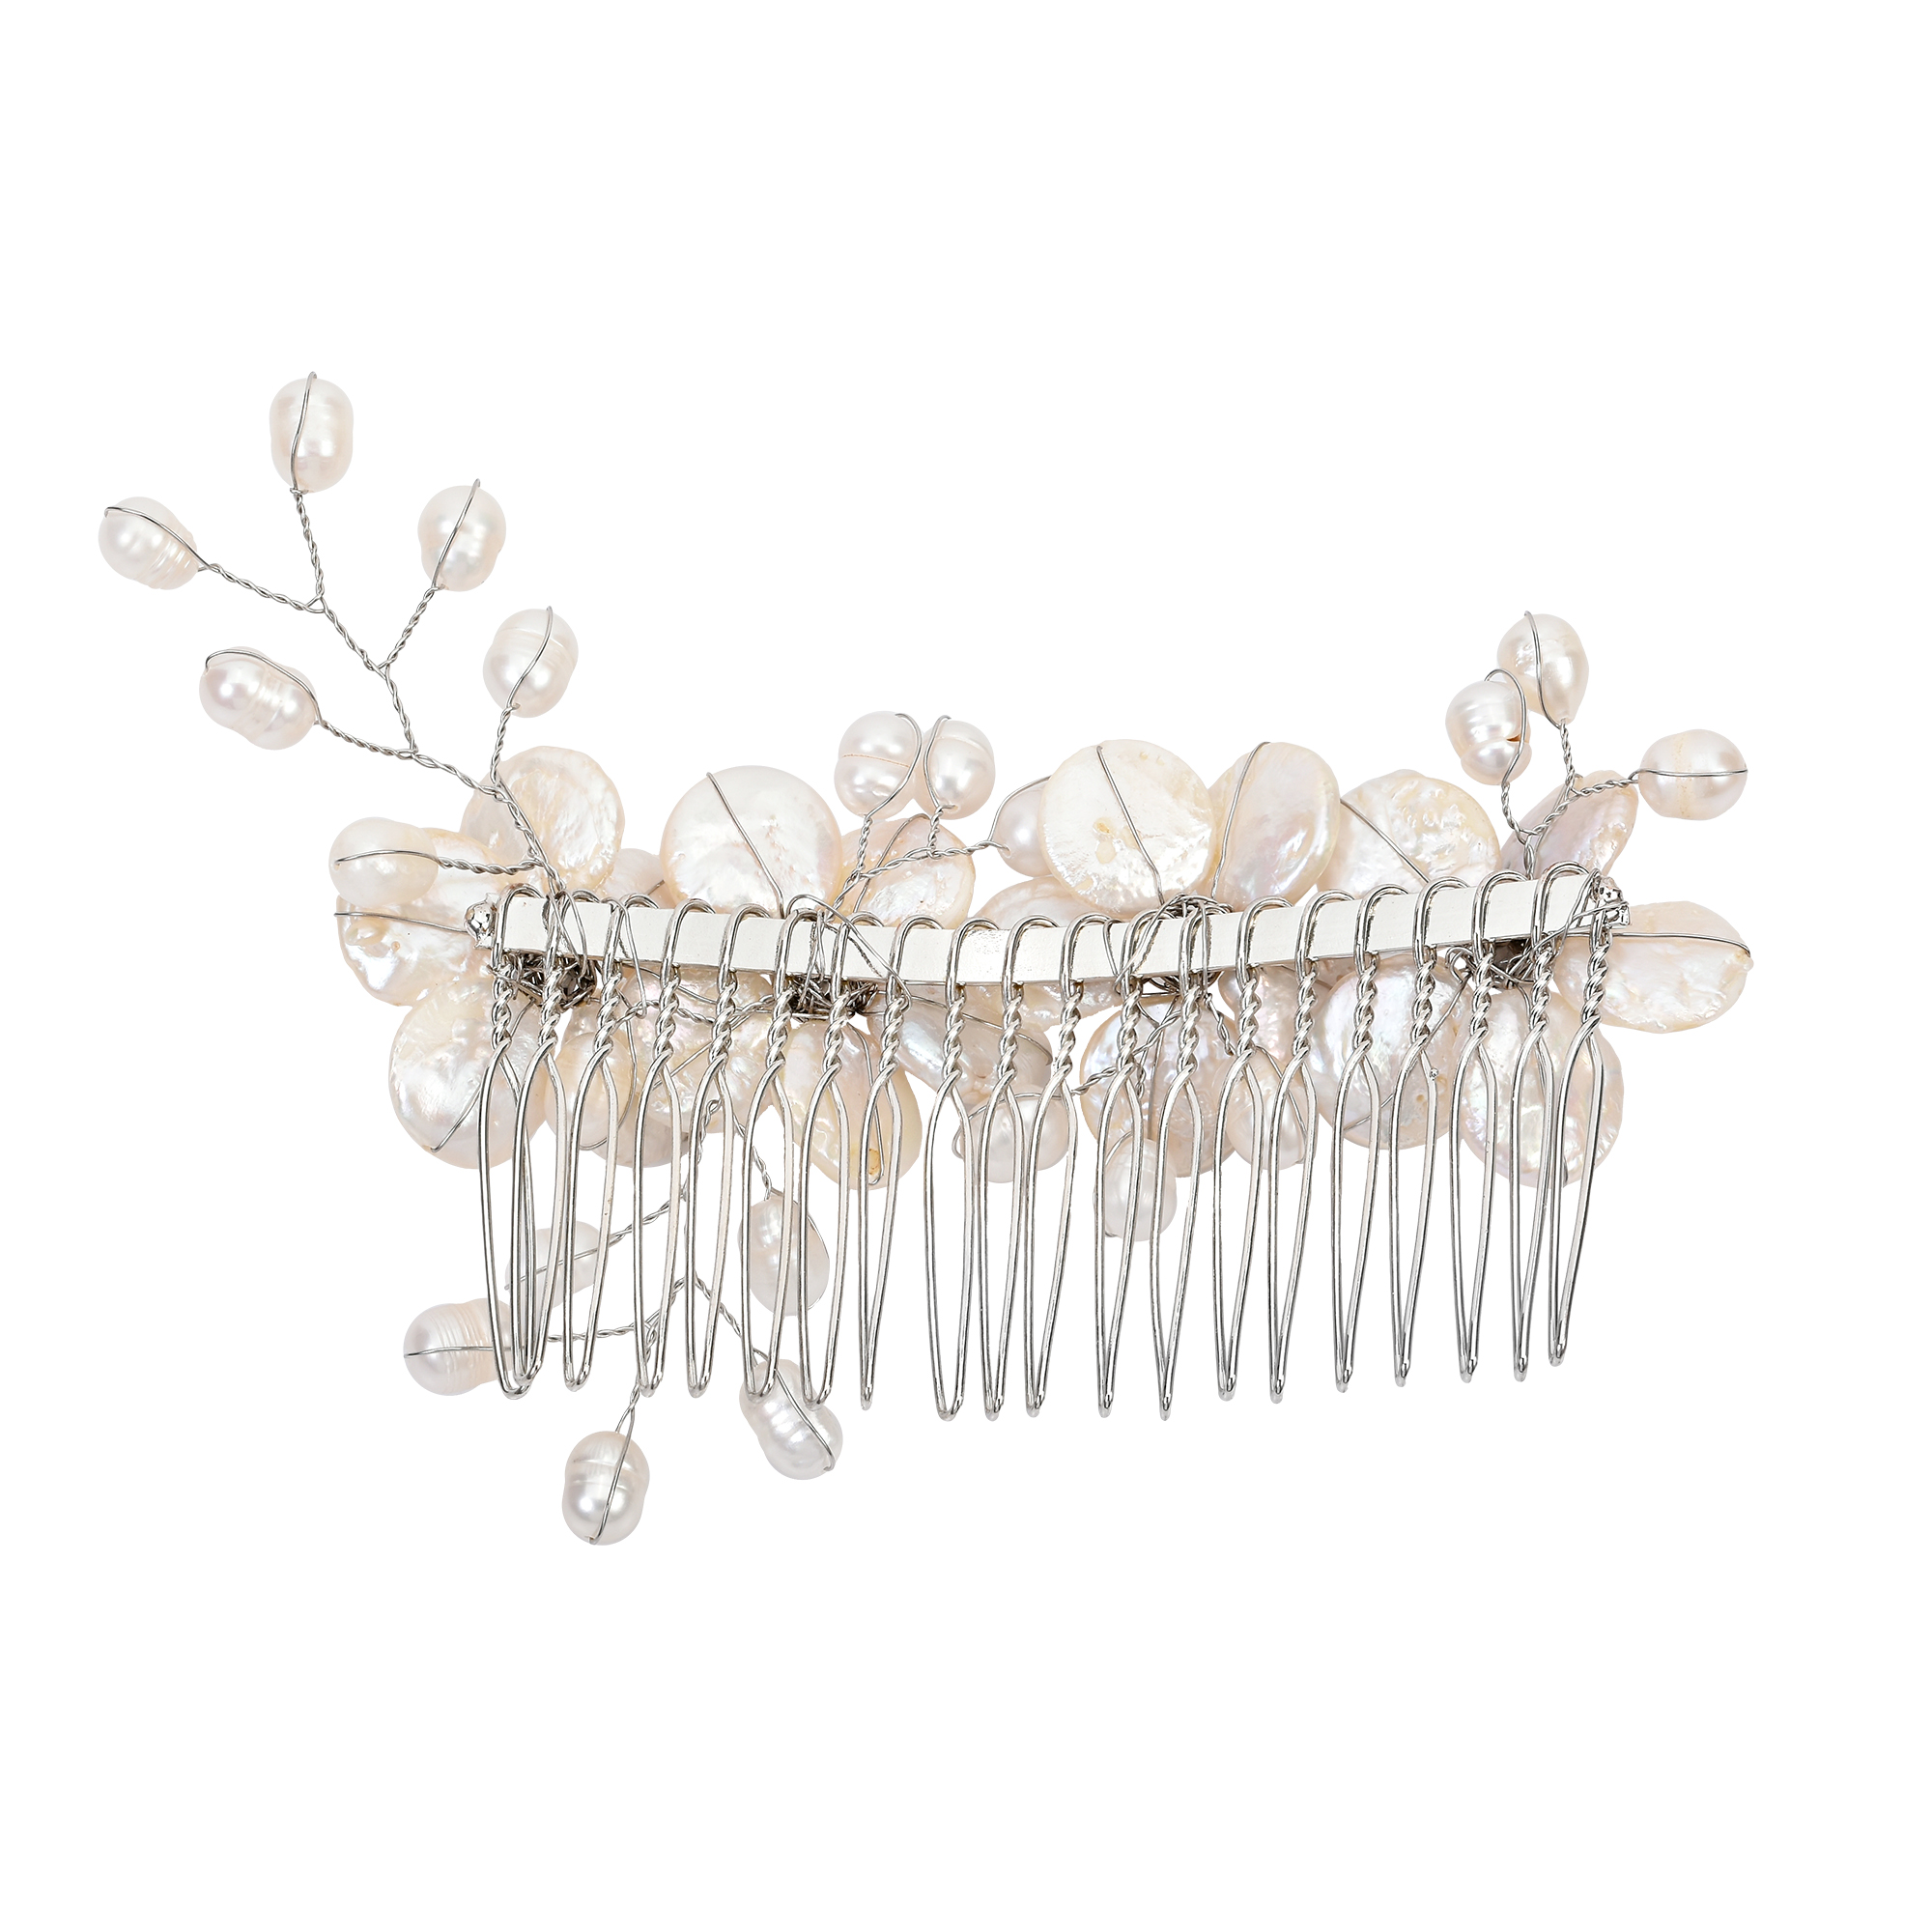 Floral Wreath Freshwater Coin Pearl Bridal Hair Comb - image 4 of 5